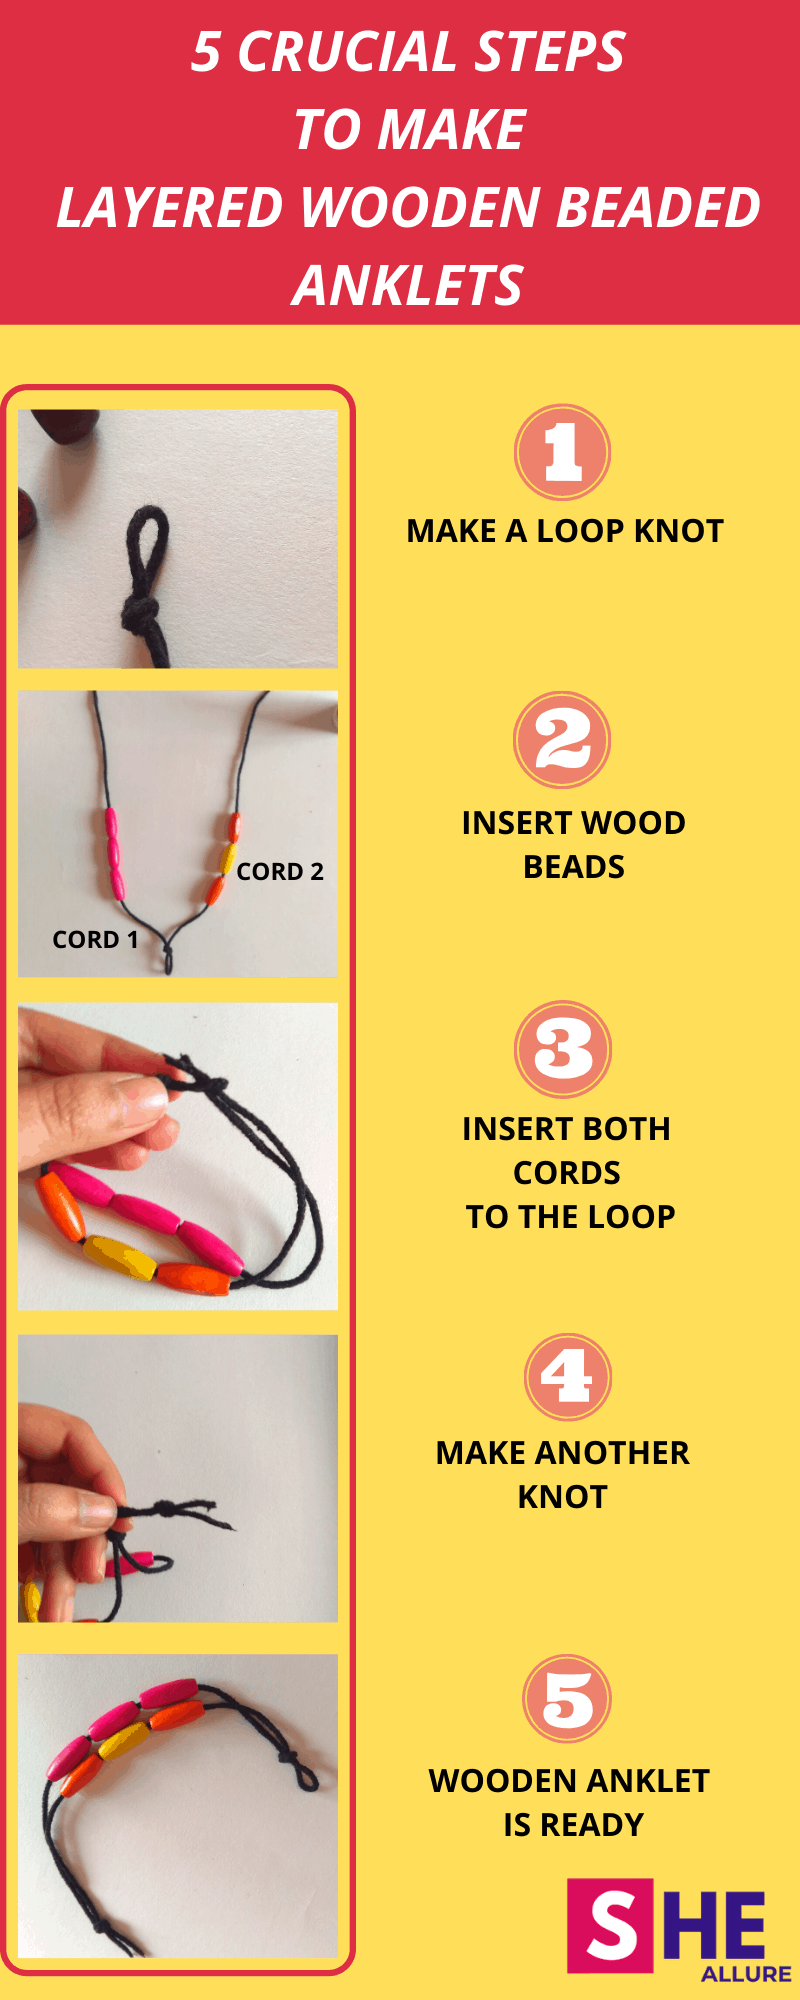 Learn to Make Layered Wooden Bead Anklets in 5 Steps